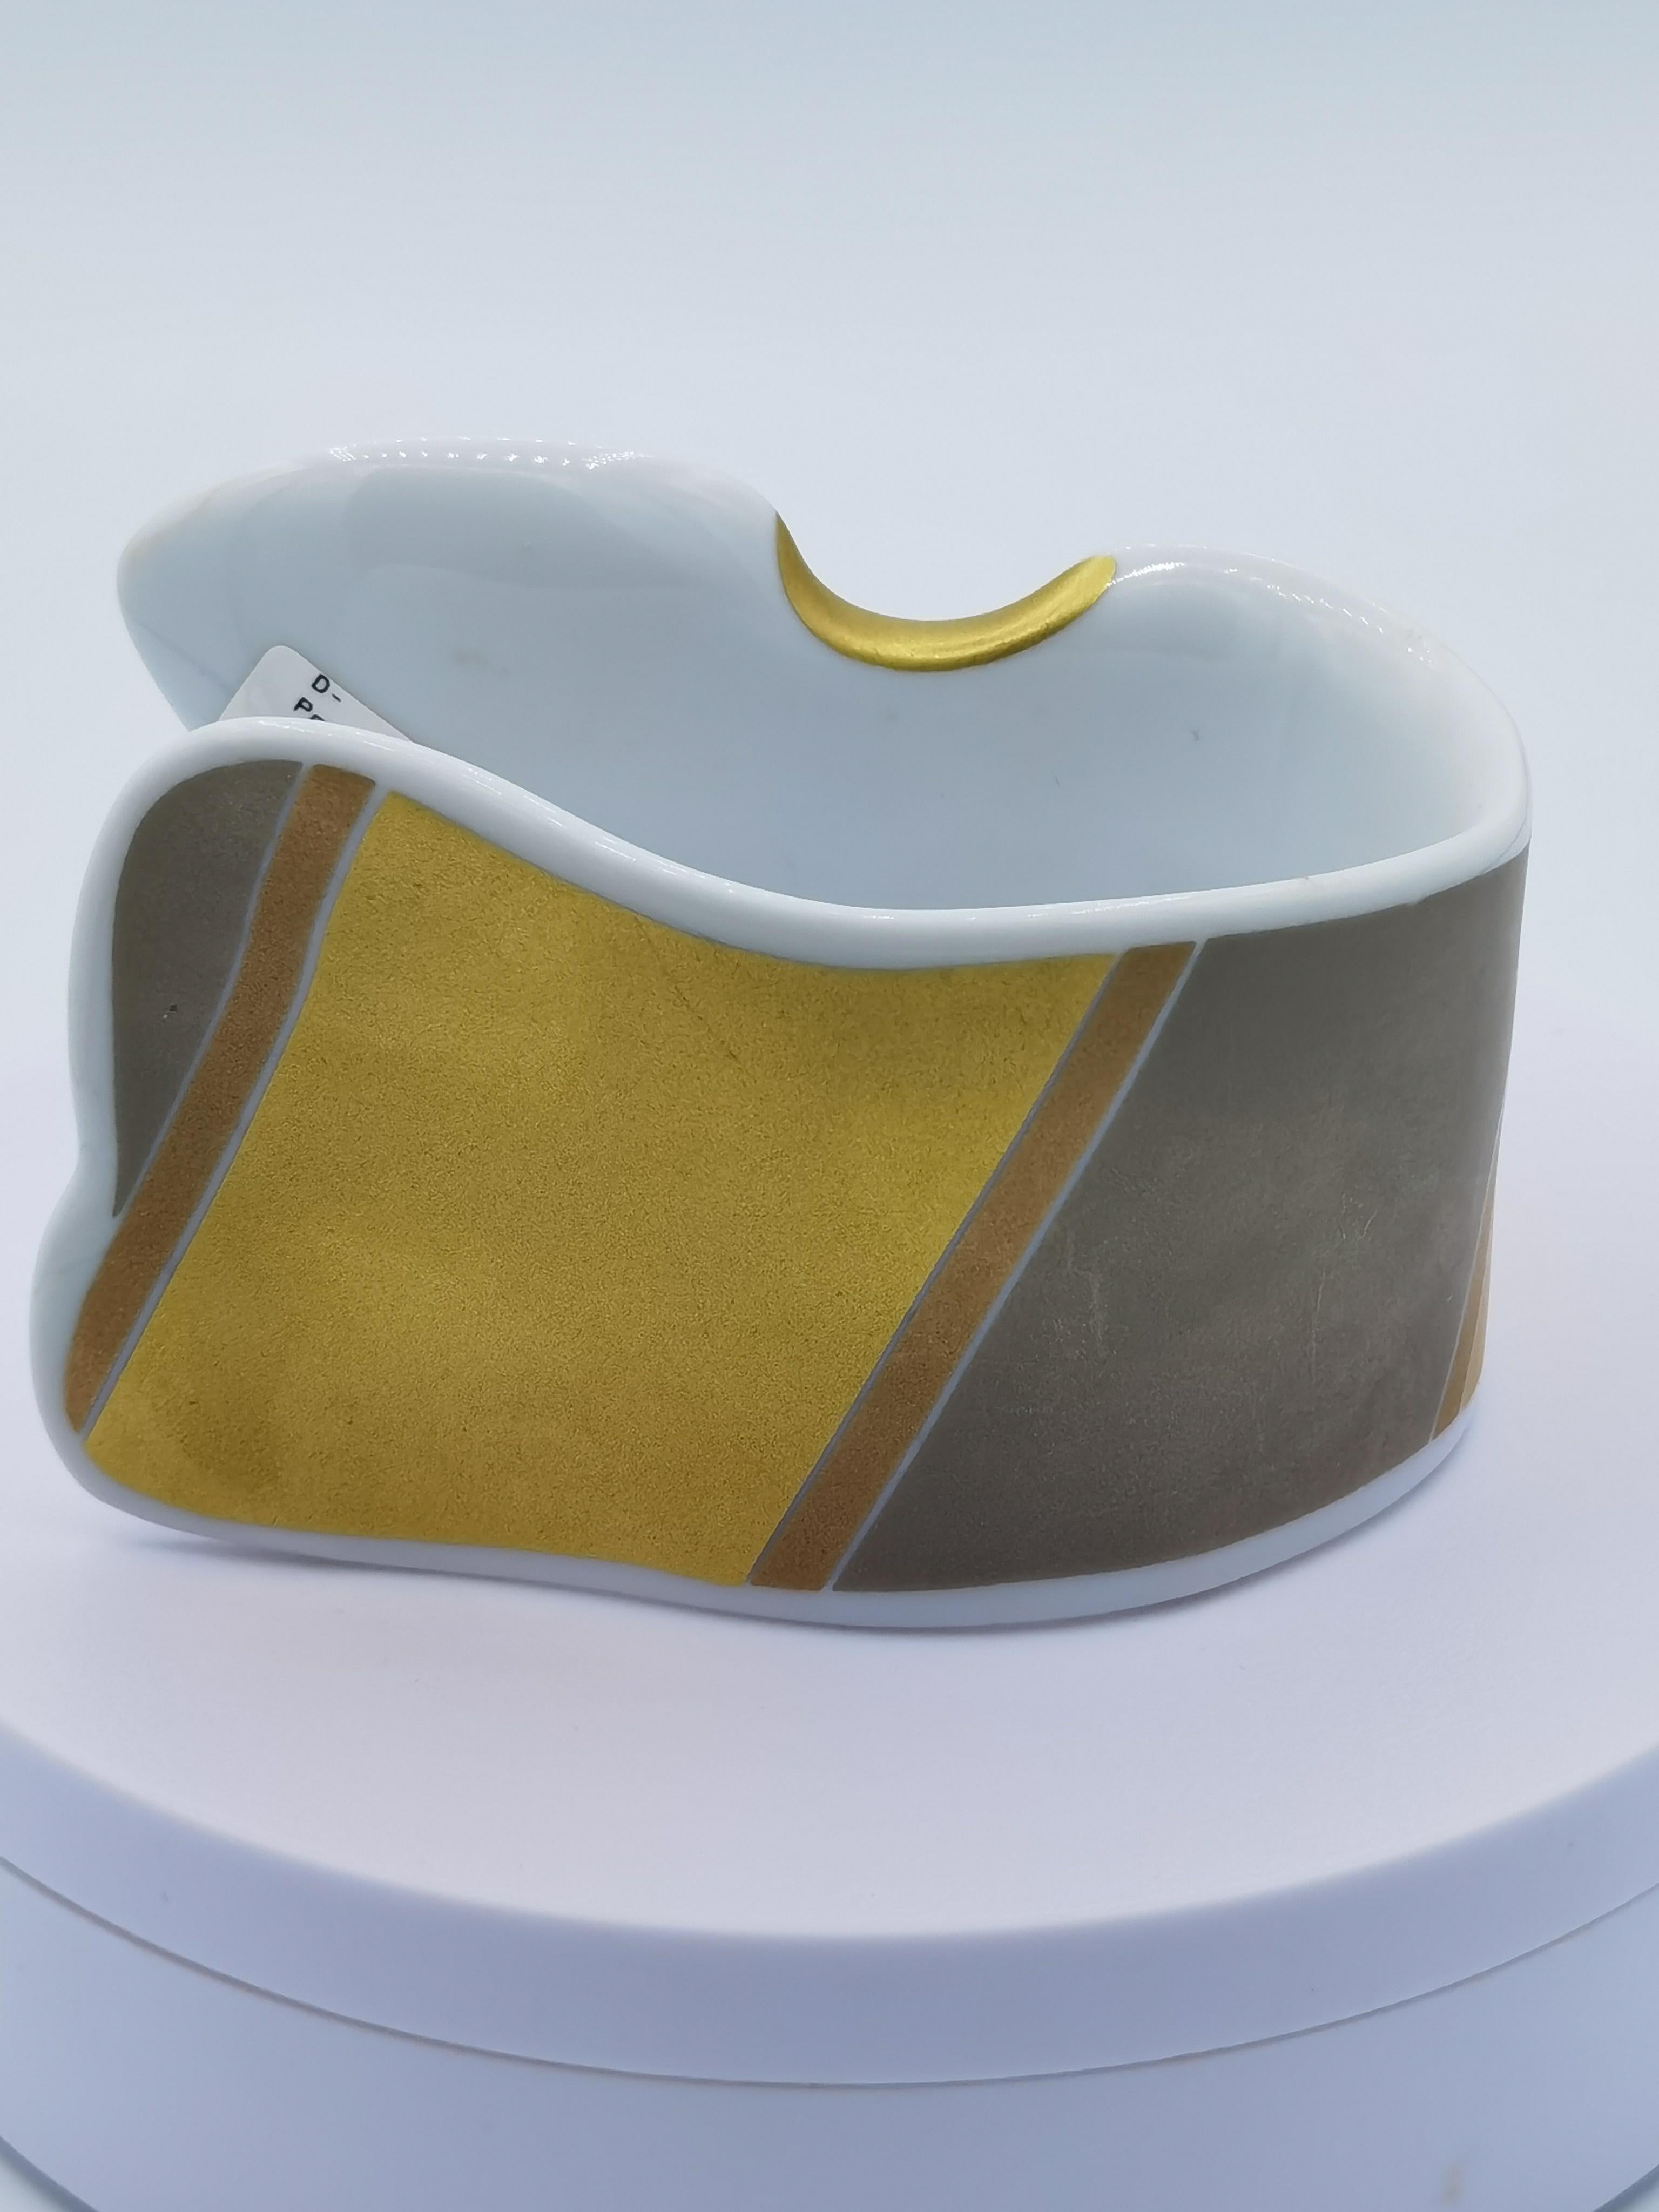 This bangle is from the German Manufacture Rosenthal
studio-line gold and silver color
original packing goes with them
Diameter inside 5 cm
Wide 4,5 cm
Length 9 cm
weight  118,07 gram 
collectible